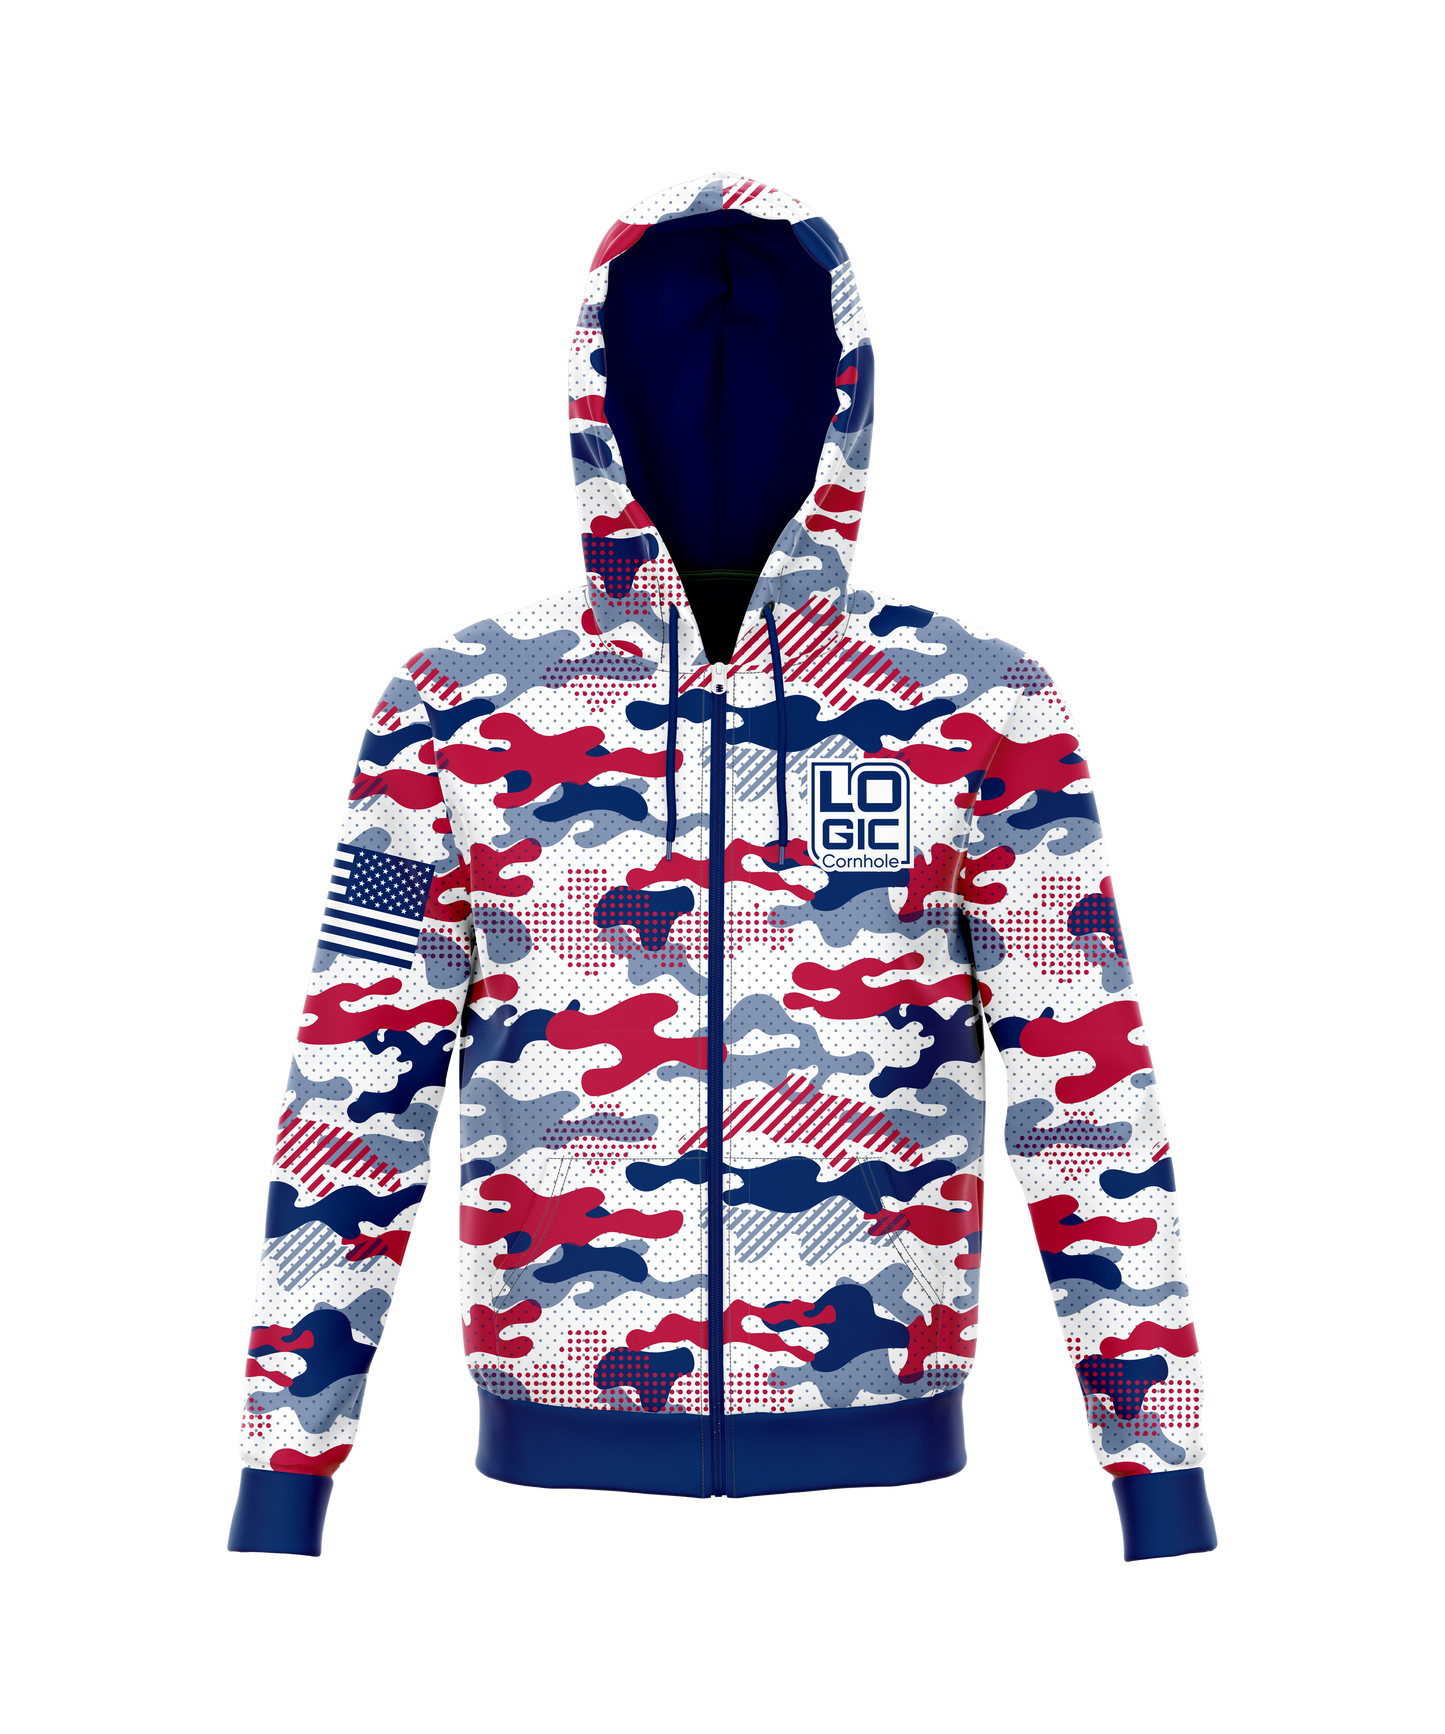 Logic Camo Full Zip Up Sublimation Hoodie Polyester Fleece -(Allow 3 weeks)